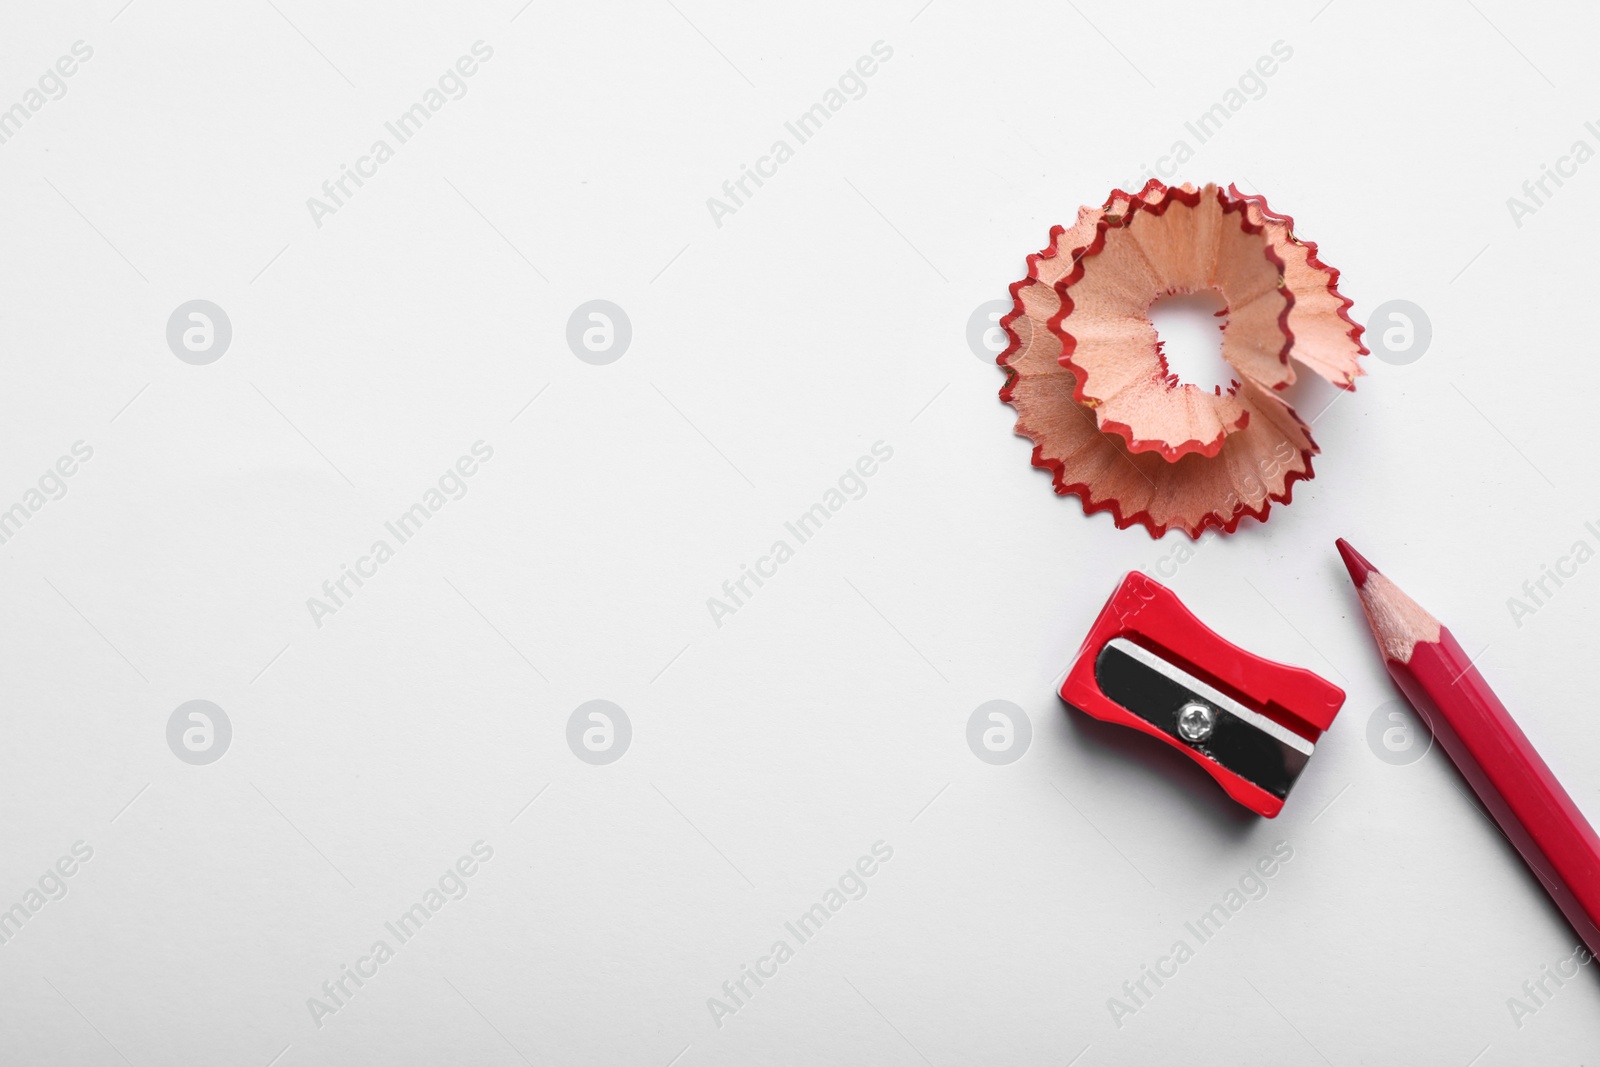 Photo of Red pencil, wooden shaving and sharpener on white background, top view